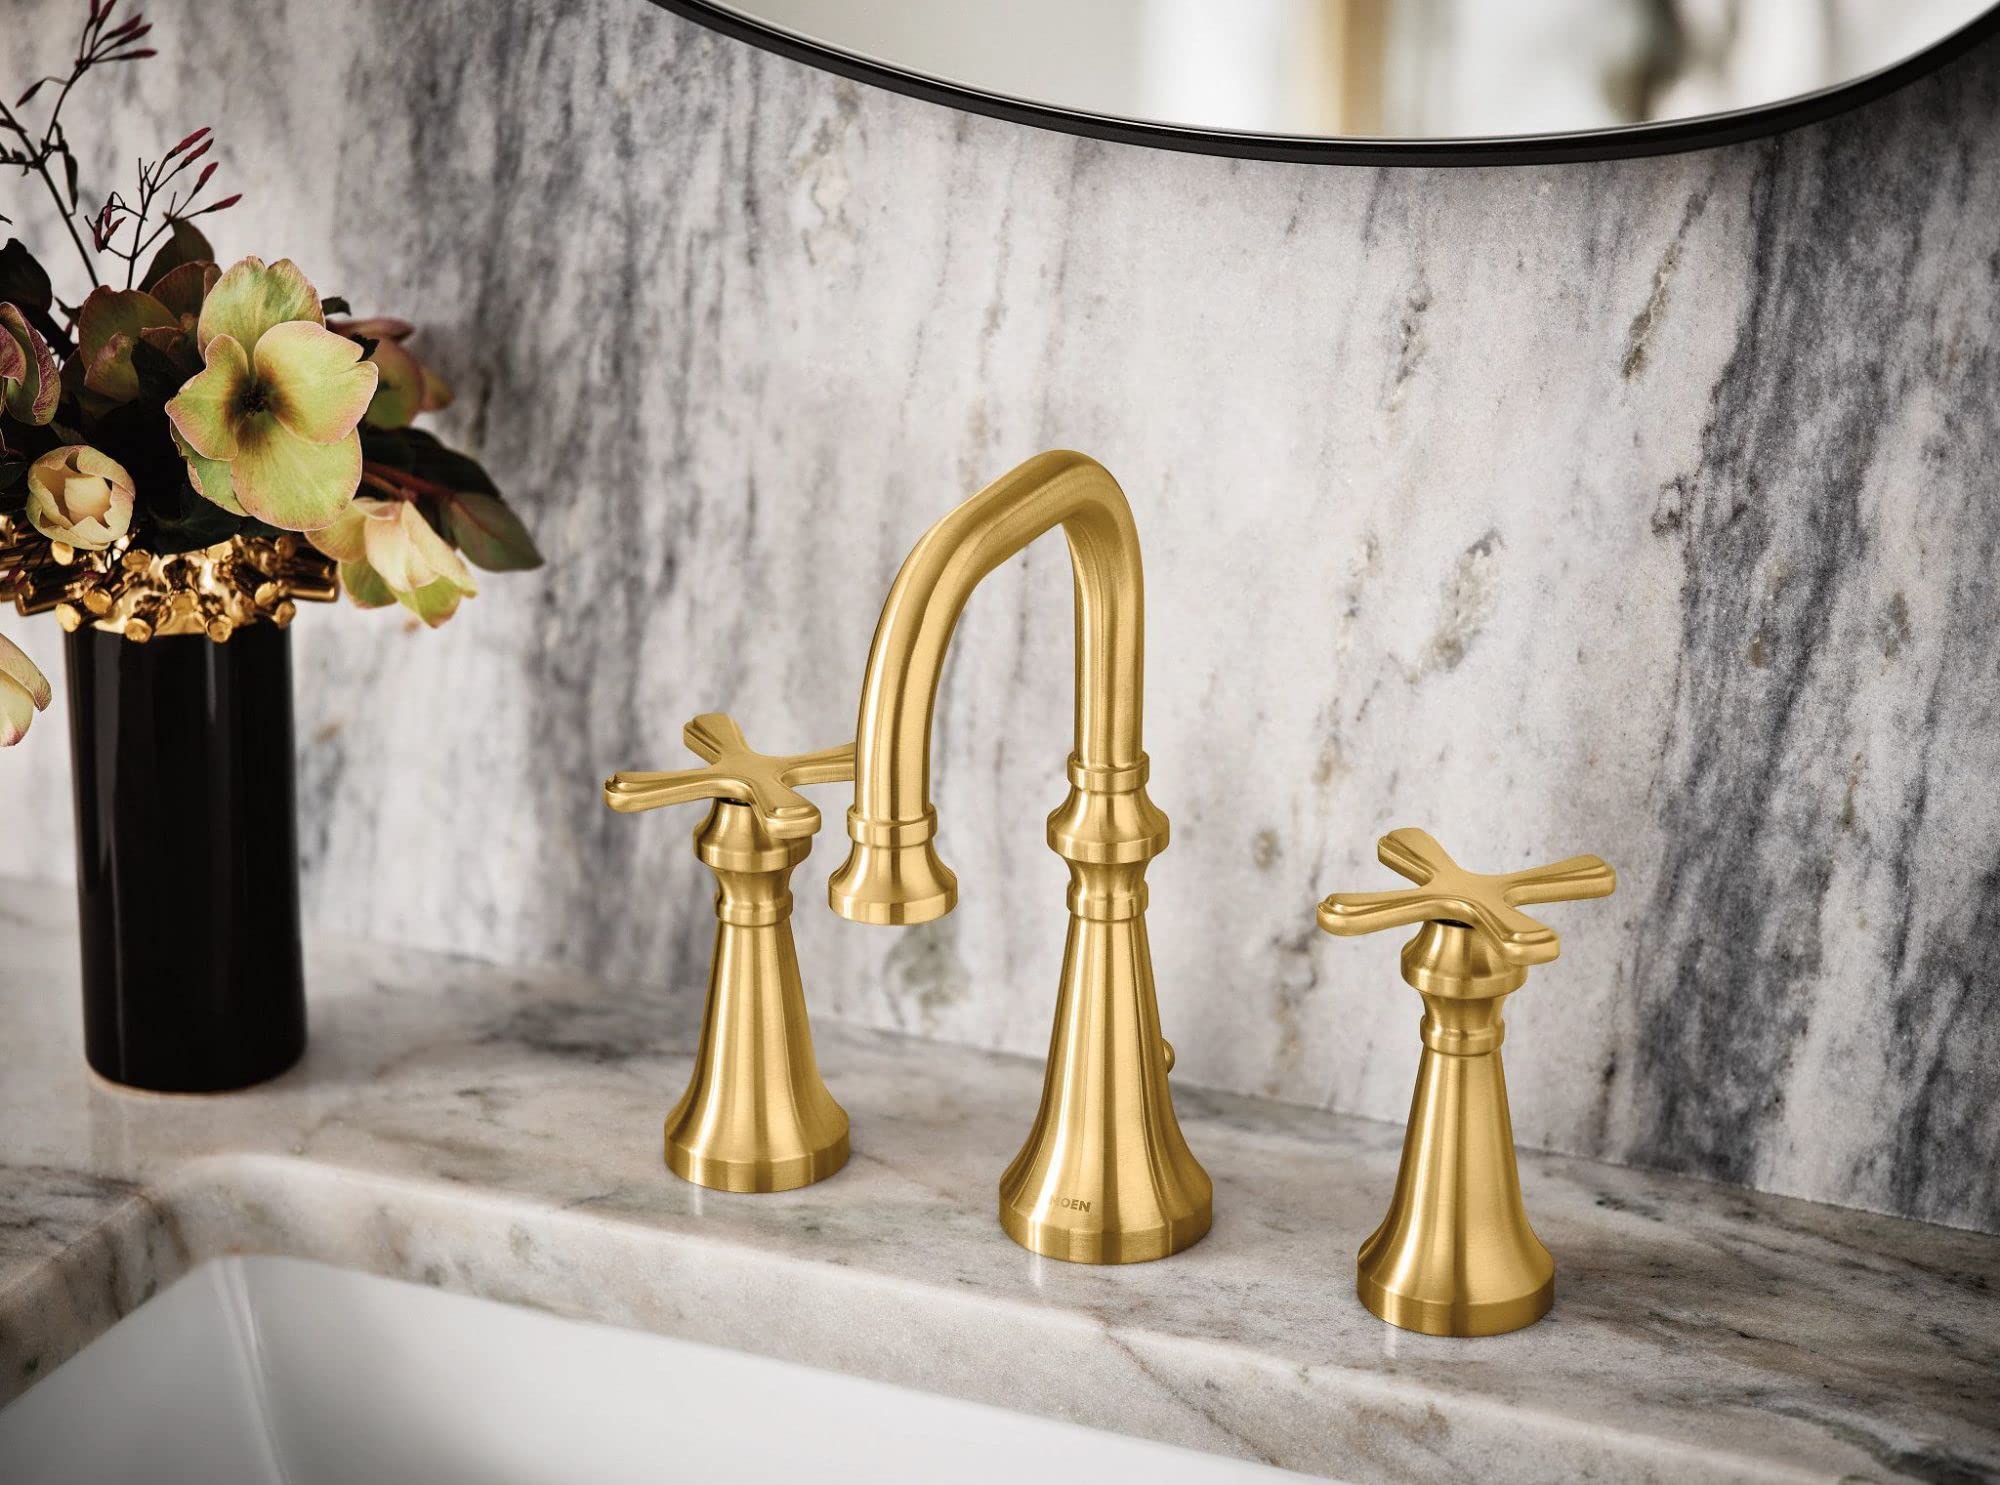 Moen TS44103BG Colinet Traditional Two Widespread High-Arc Bathroom Faucet with Cross Handles Valve Required, Brushed Gold